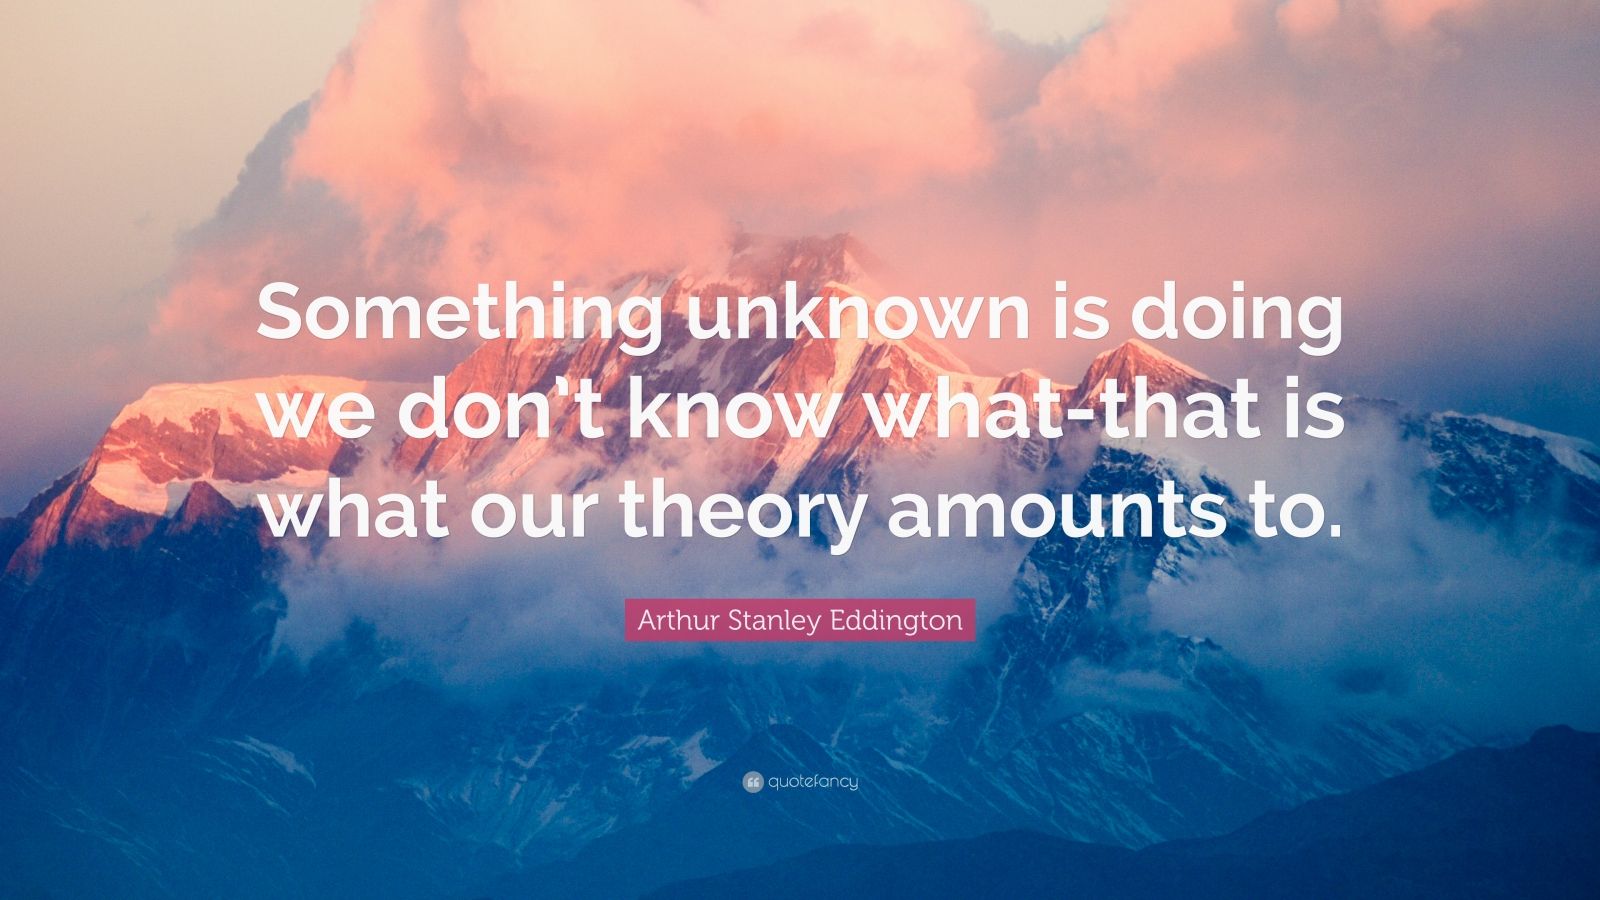 Arthur Stanley Eddington Quote: “Something unknown is doing we don’t ...